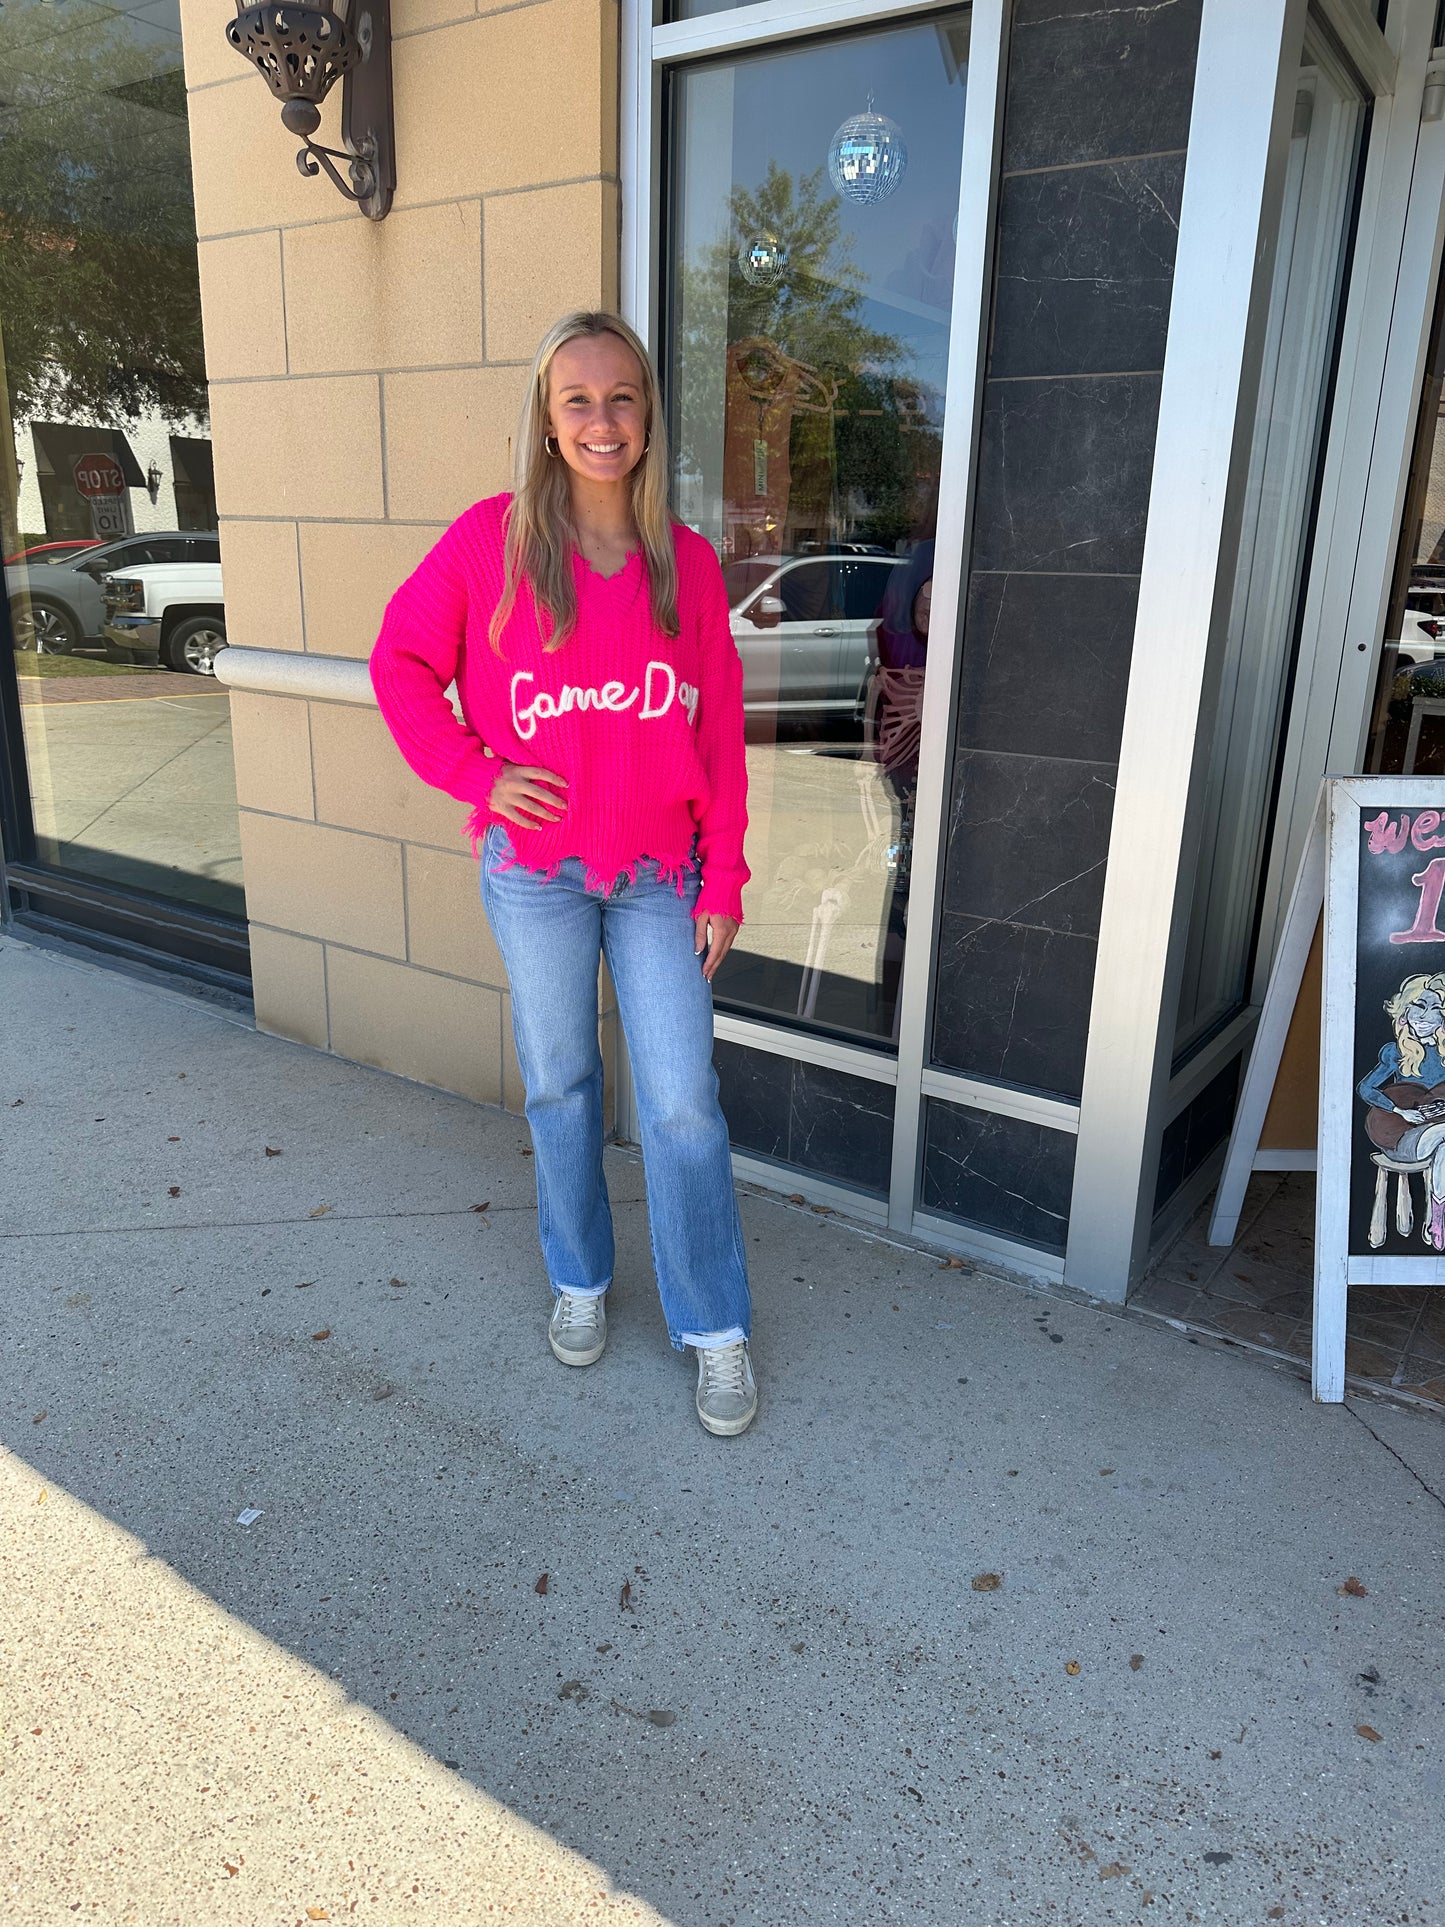 The City Sweater in hot pink with gameday script